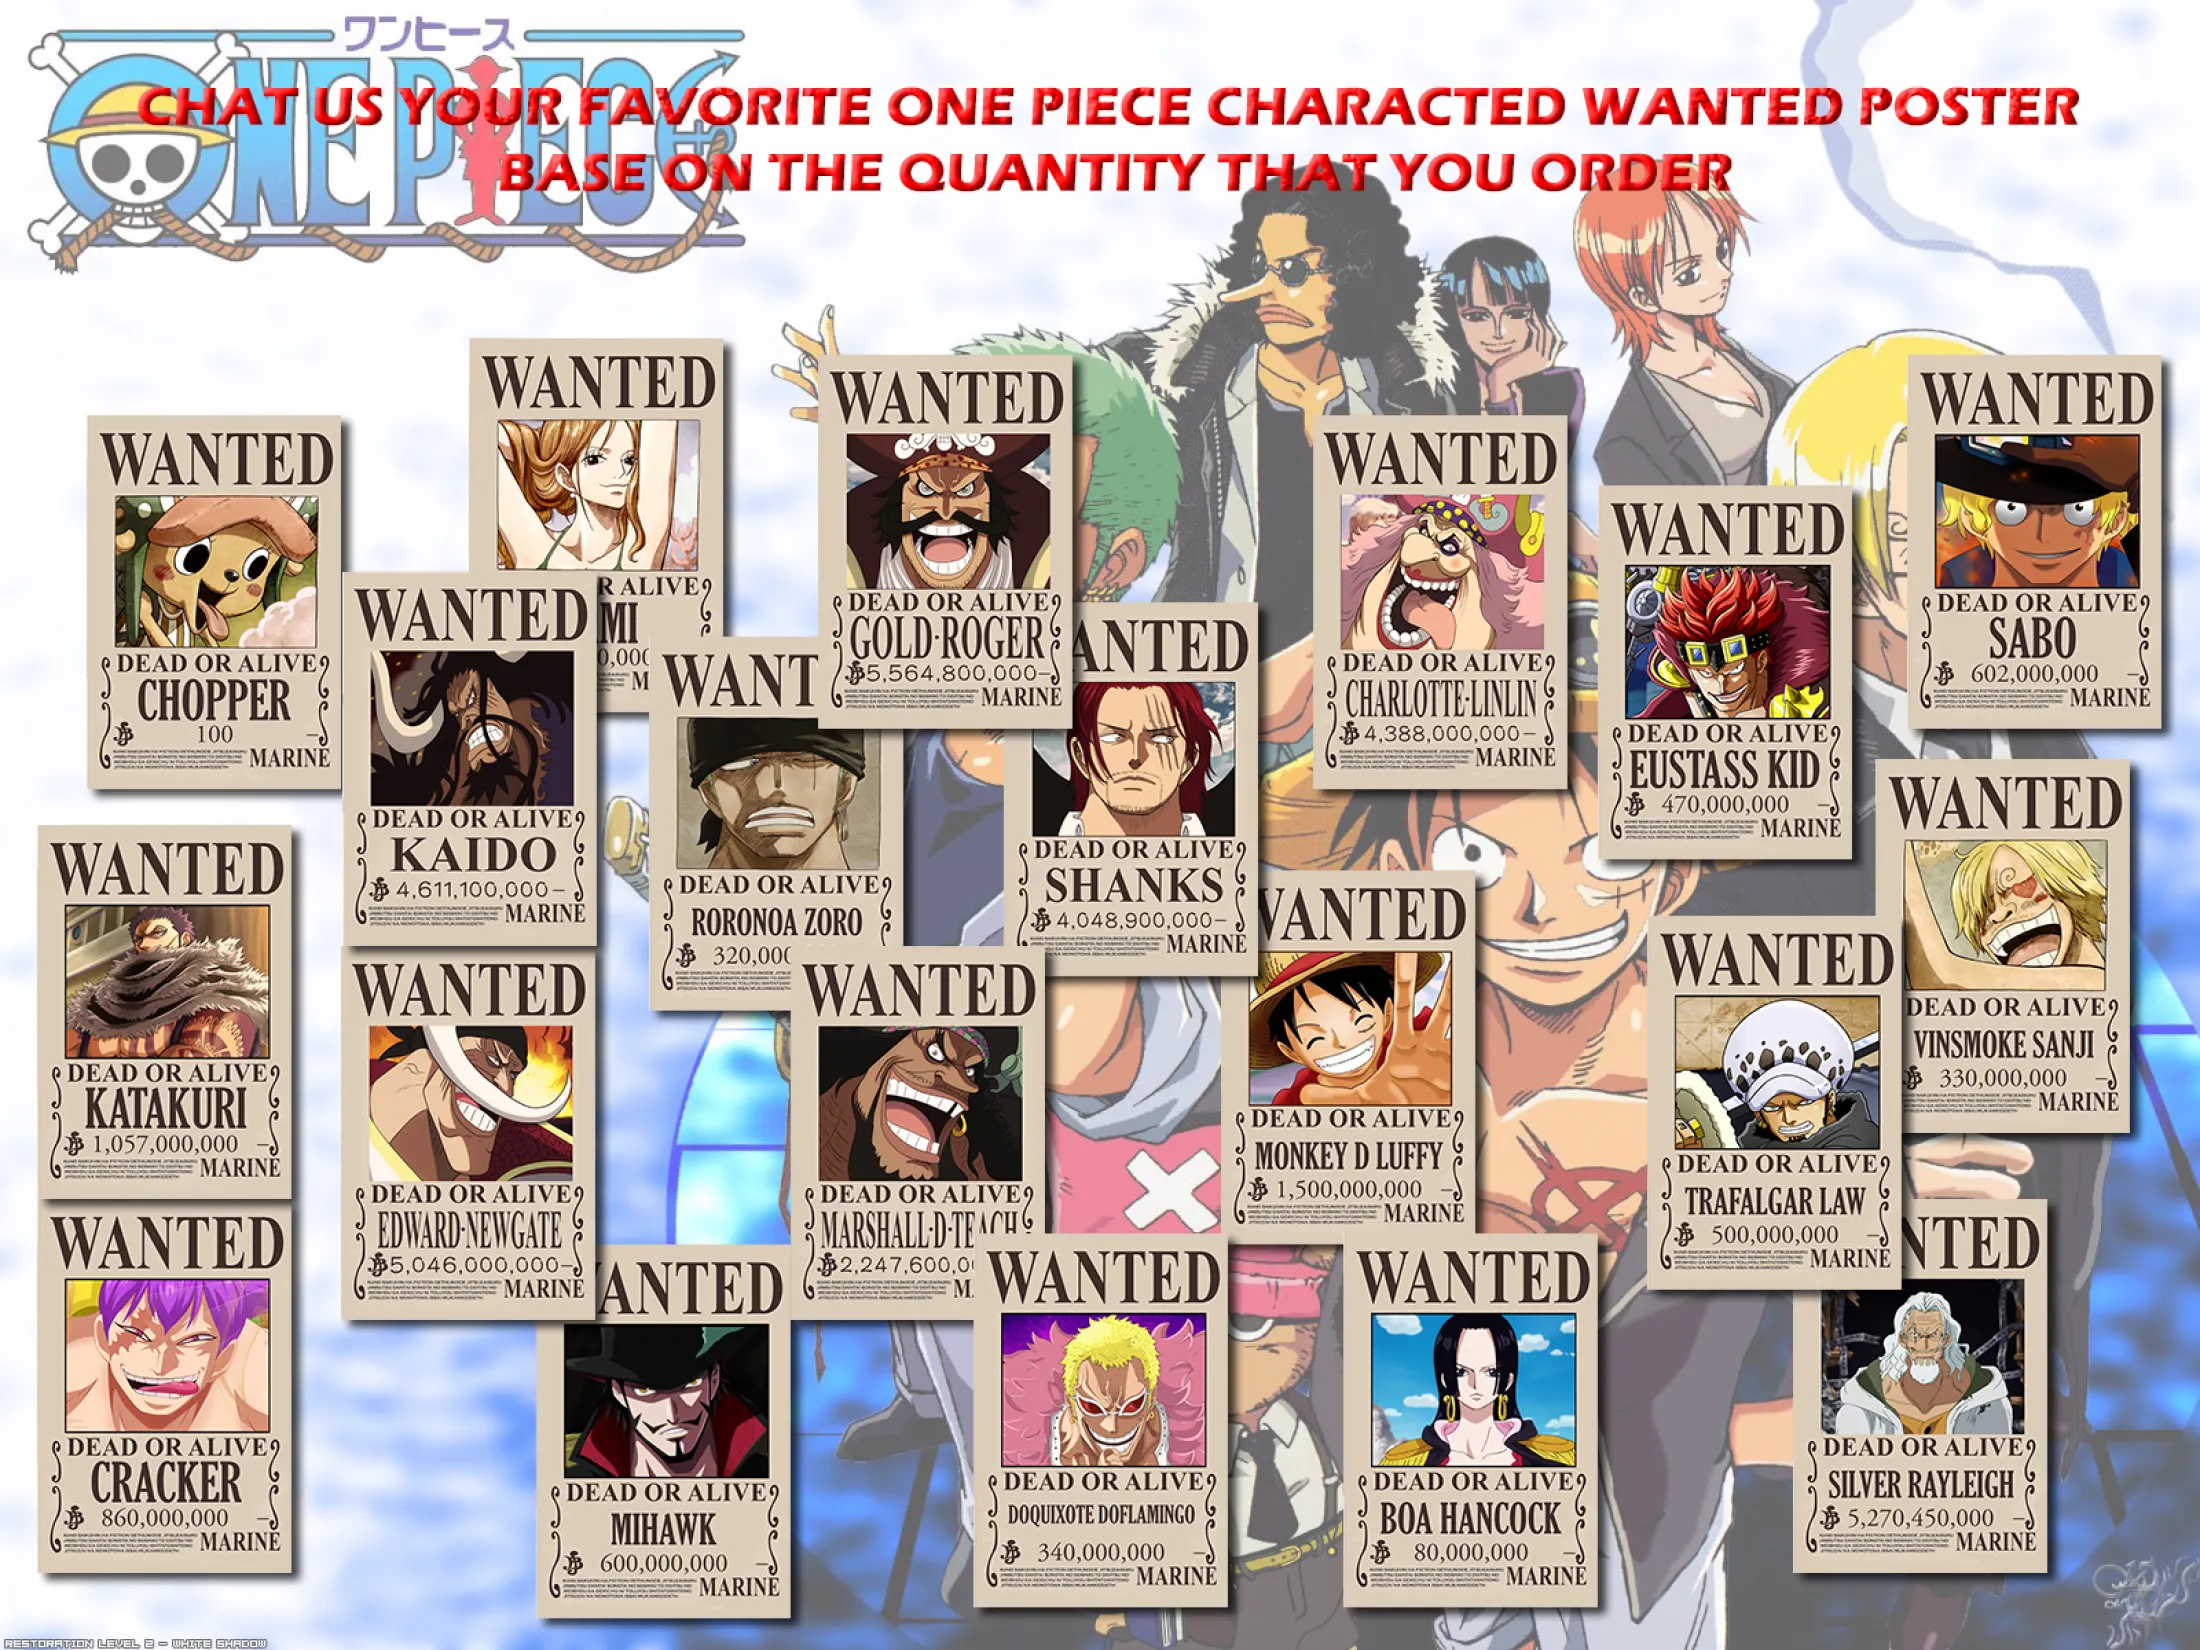 High Quality Print One Piece Wanted Poster Luffy Pirate King Emperor Yonko Pirates Shichibukai Warlords Chat Us Any Your Favorite Wanted Poster Base On The Quantity That You Order Lazada Ph